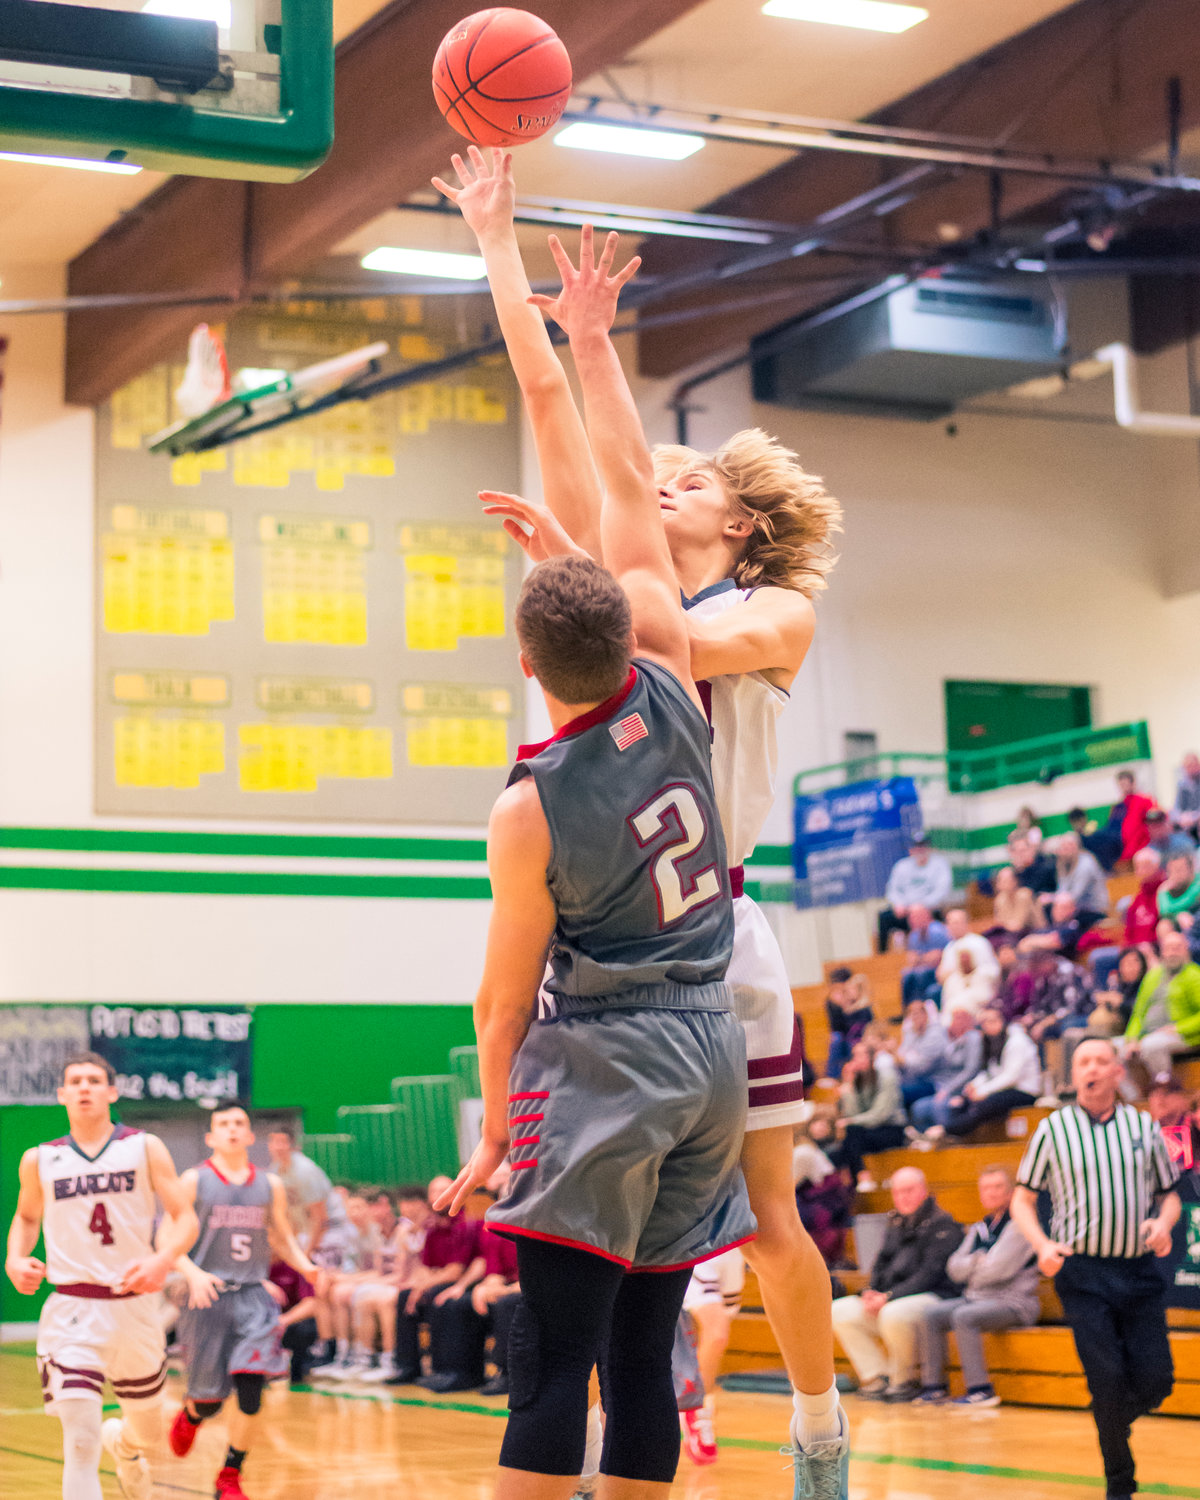 W.F. West's Dirk Plakinger (34) attempts a layup during a game against Jacks Thursday night at Tumwater High School.